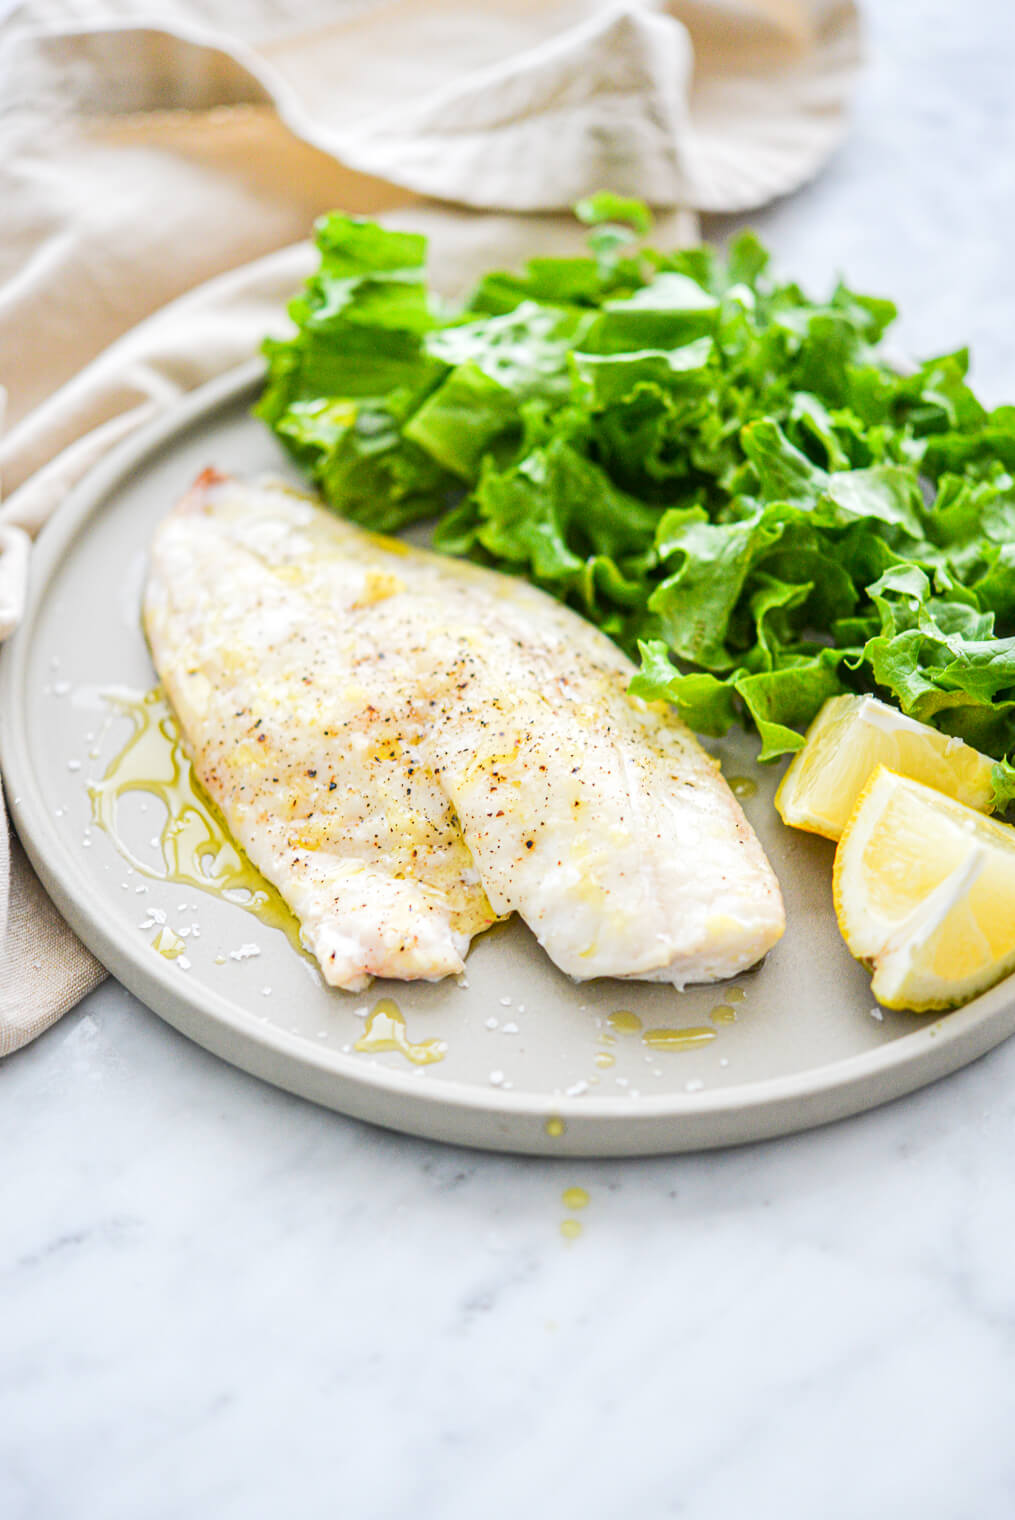 Incredible Oven Baked Red Snapper